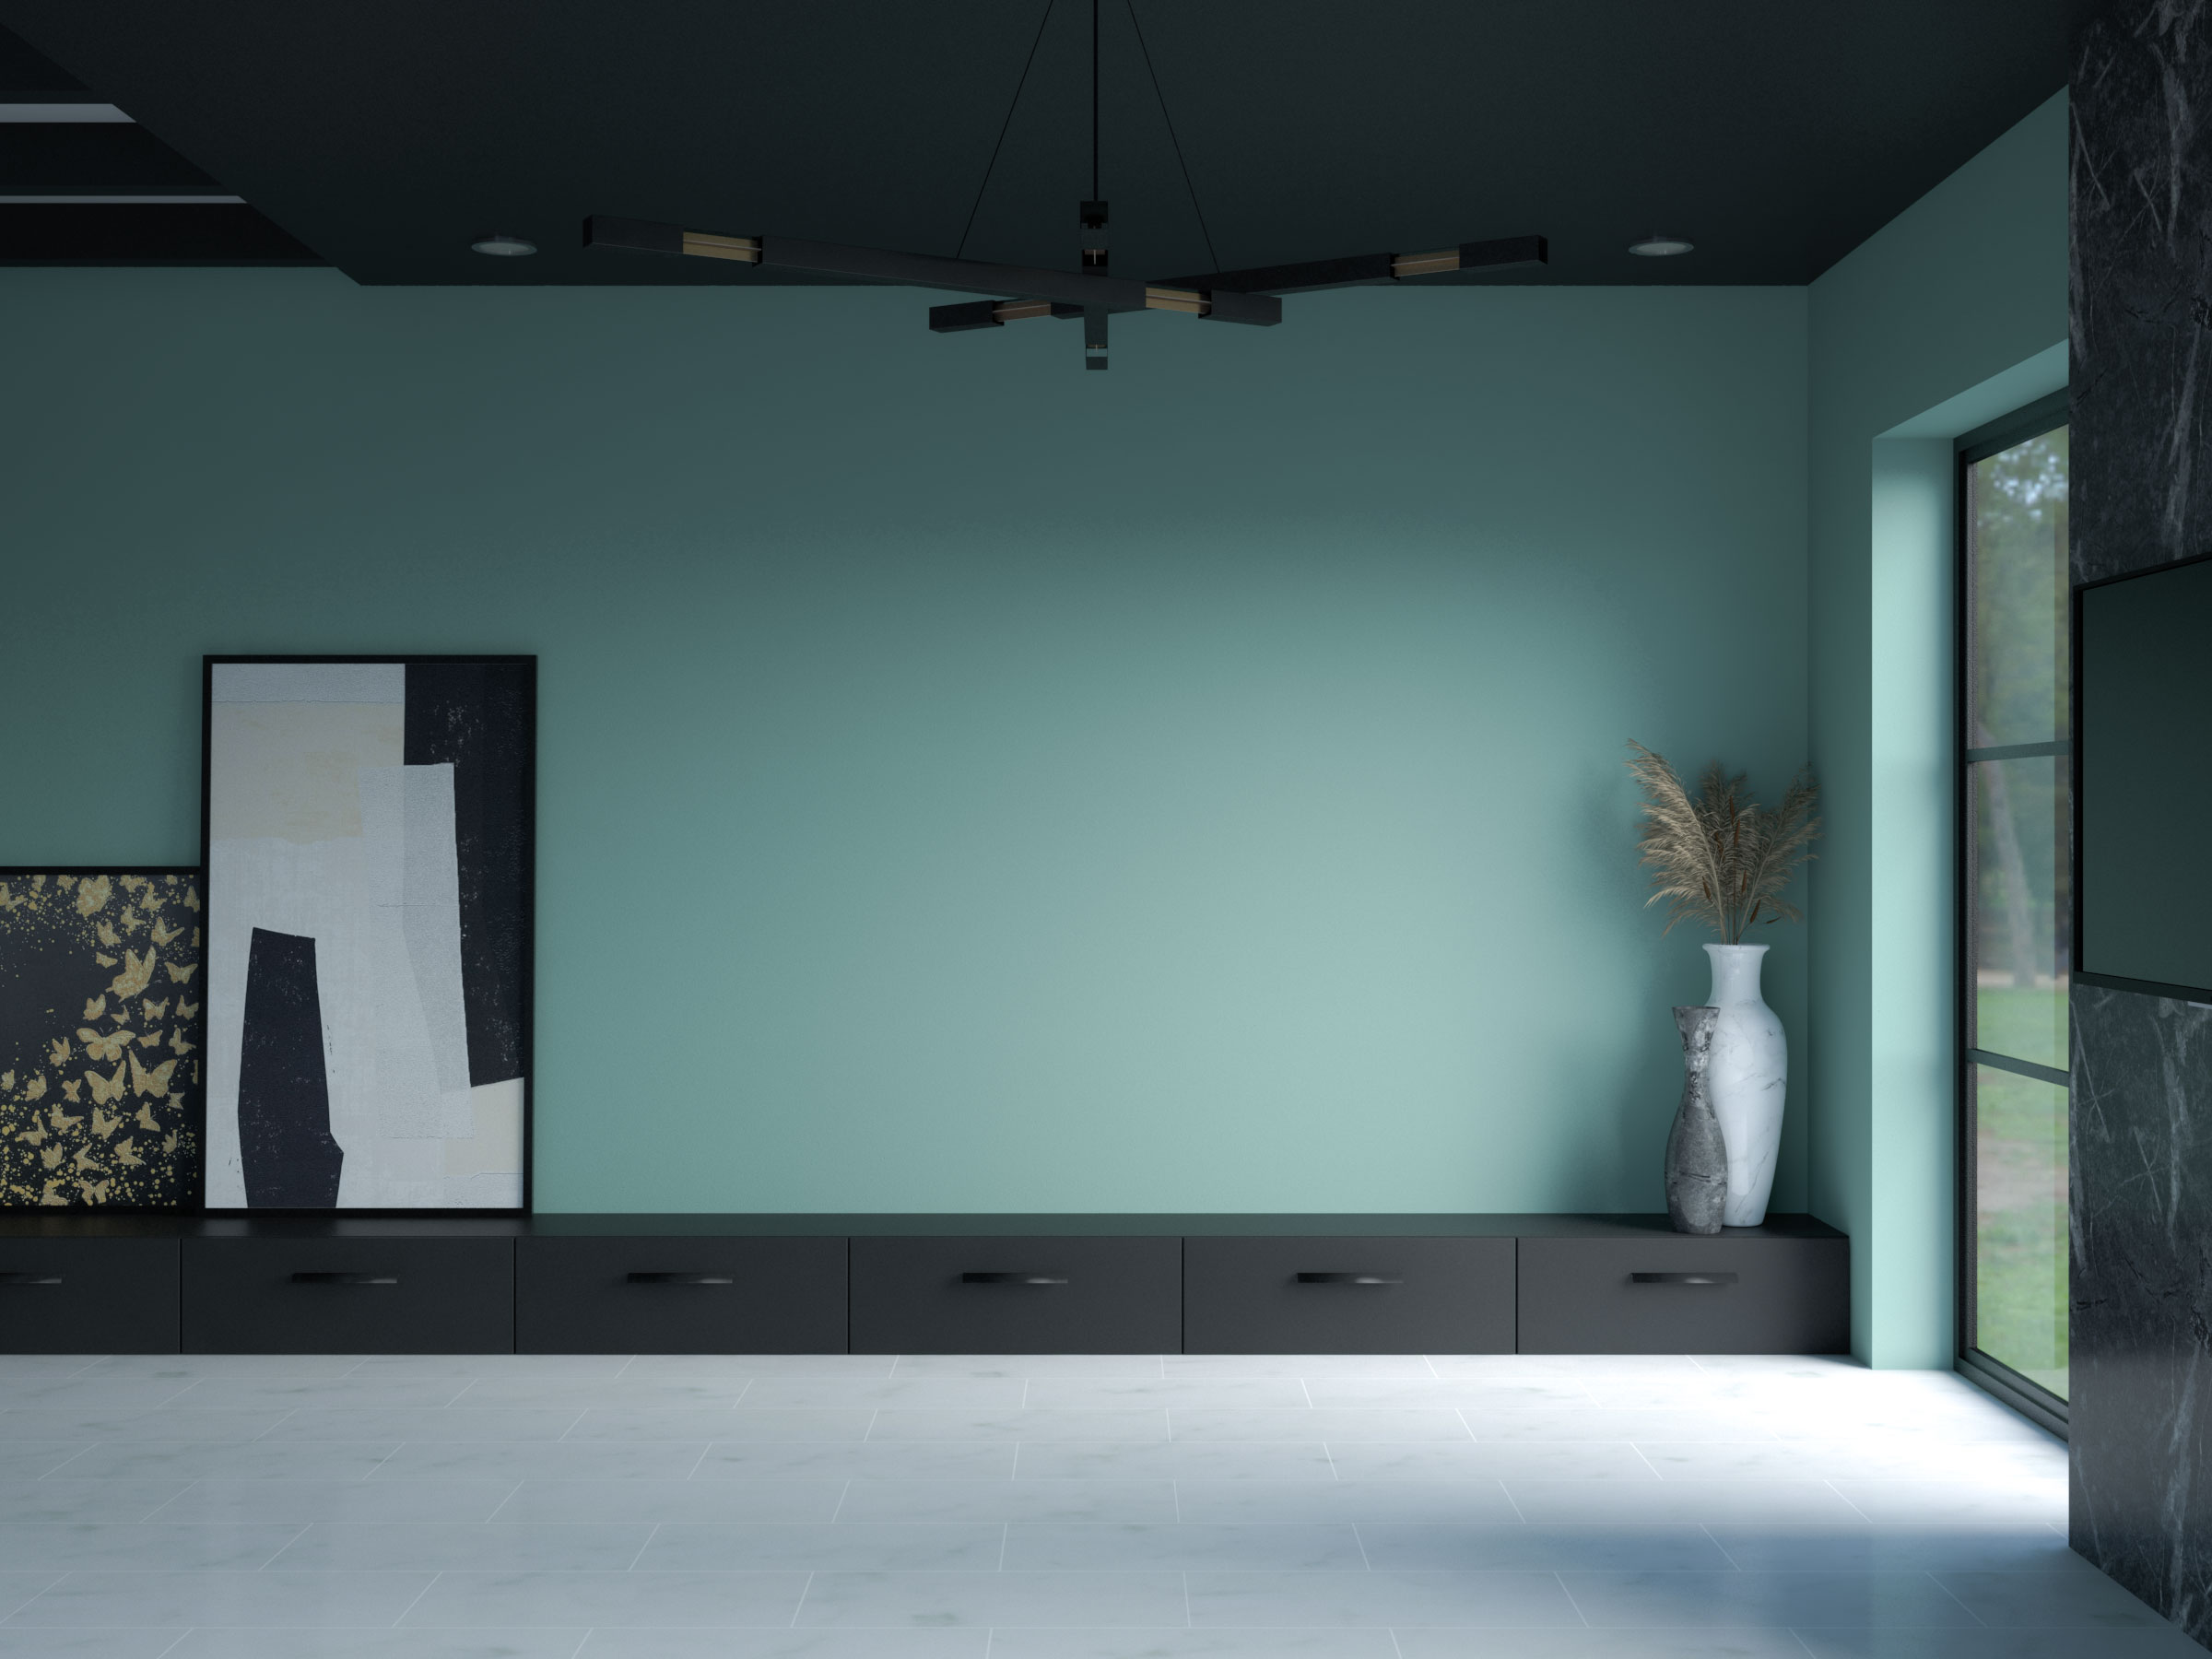 Teal walls with black ceiling